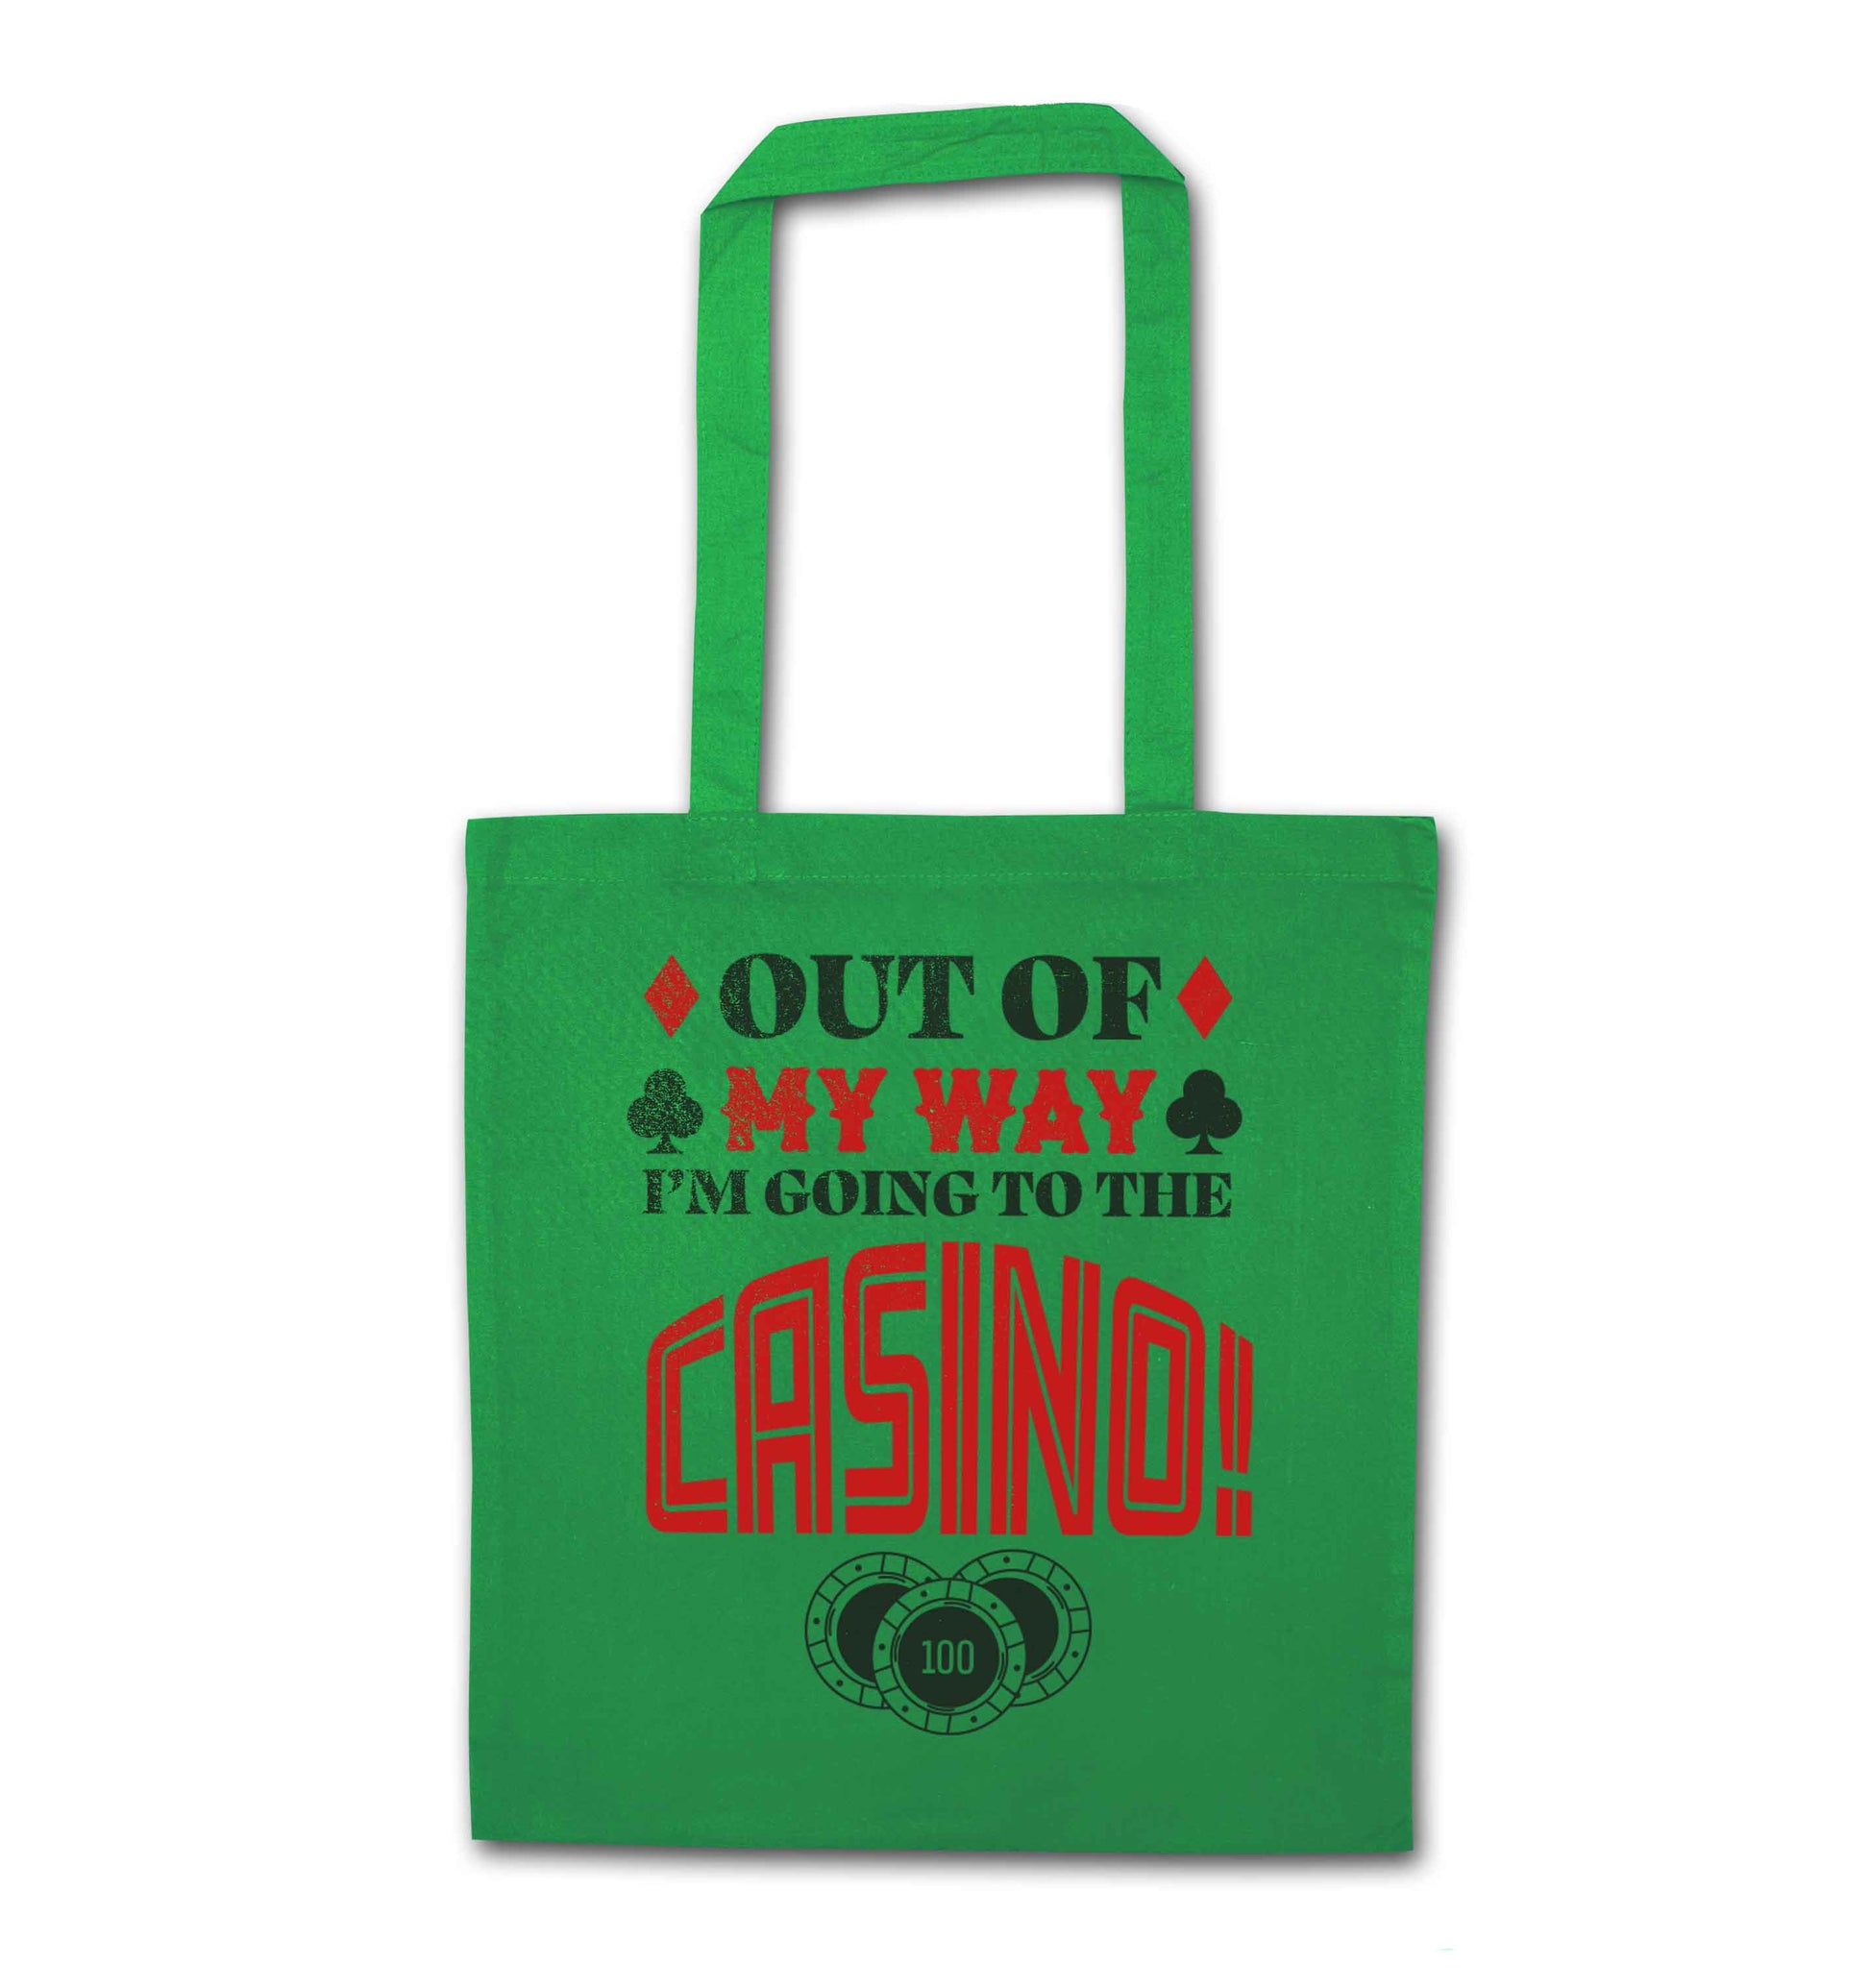 Out of my way I'm going to the casino green tote bag